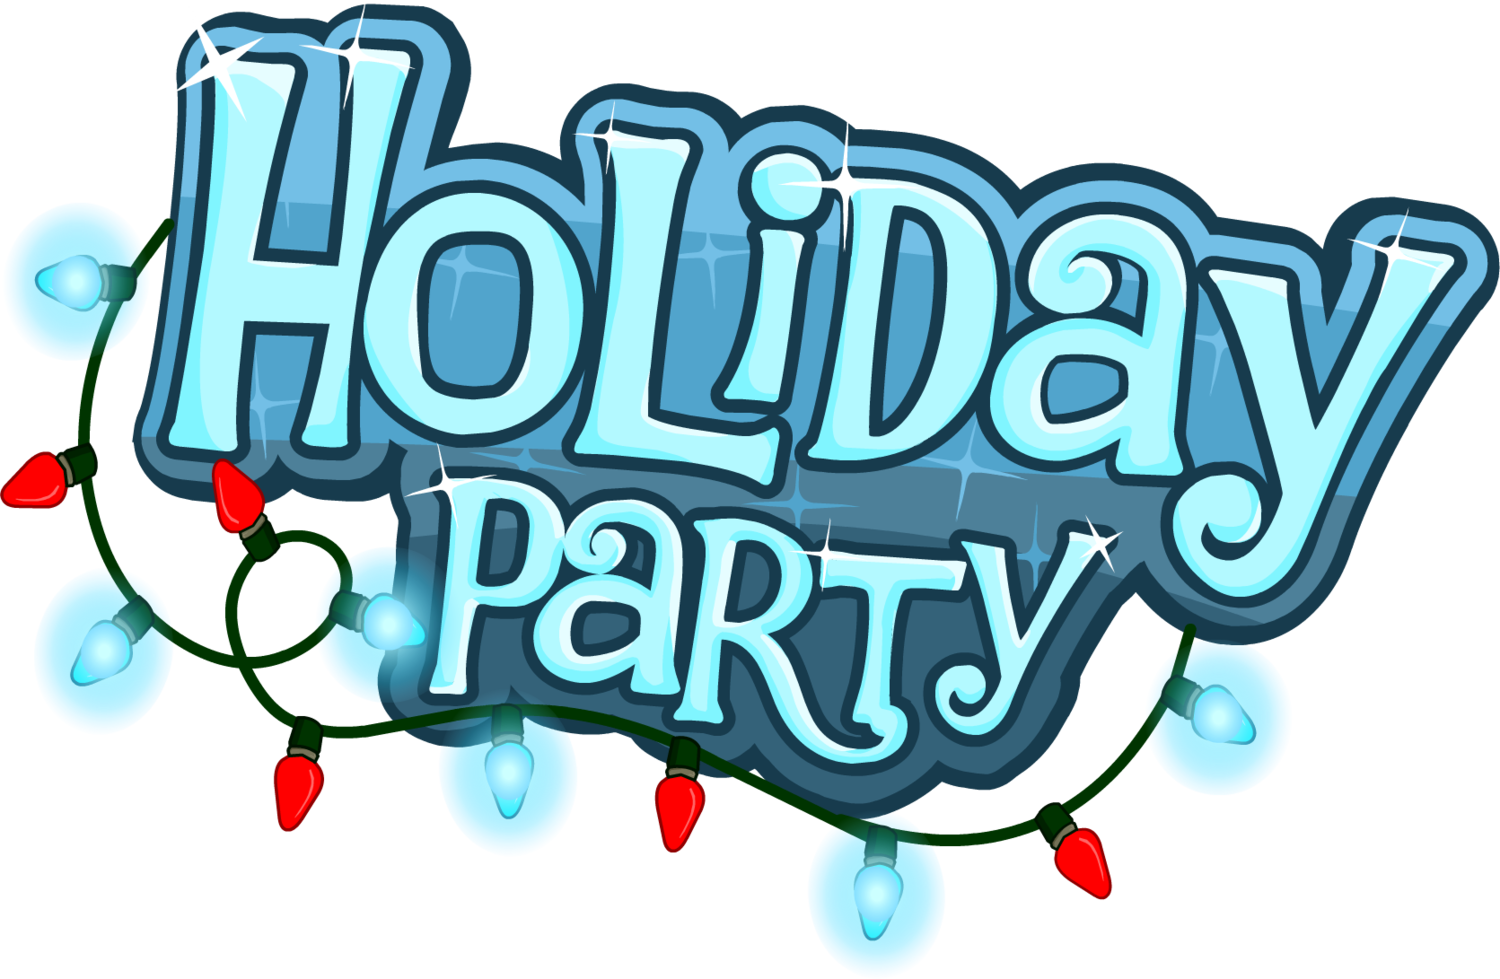 Holiday party crossfit catacombs. Holidays clipart december